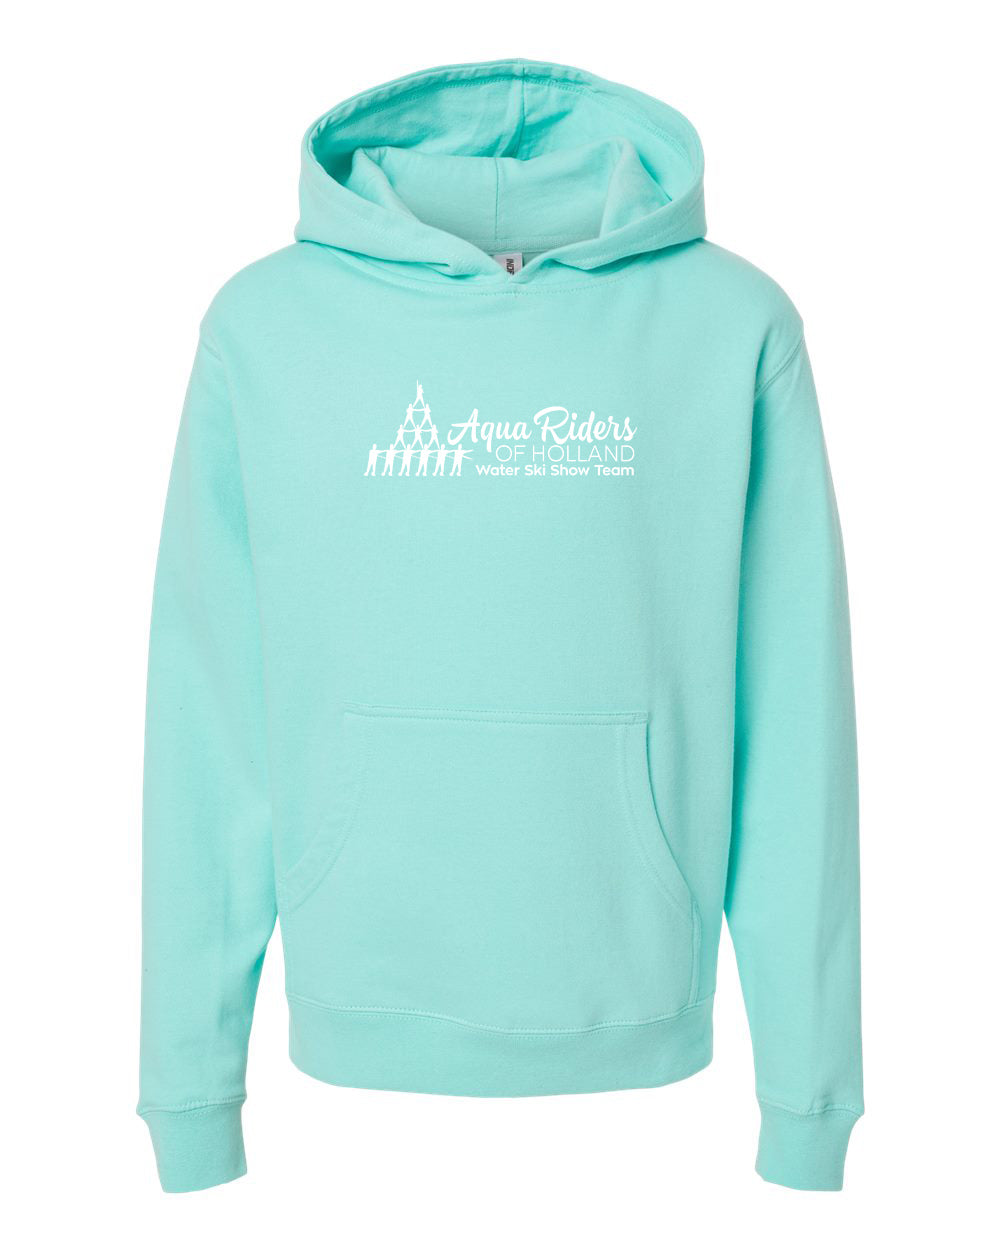 Aqua Riders - Youth Independent Hoodie - SS4001Y (color options available)